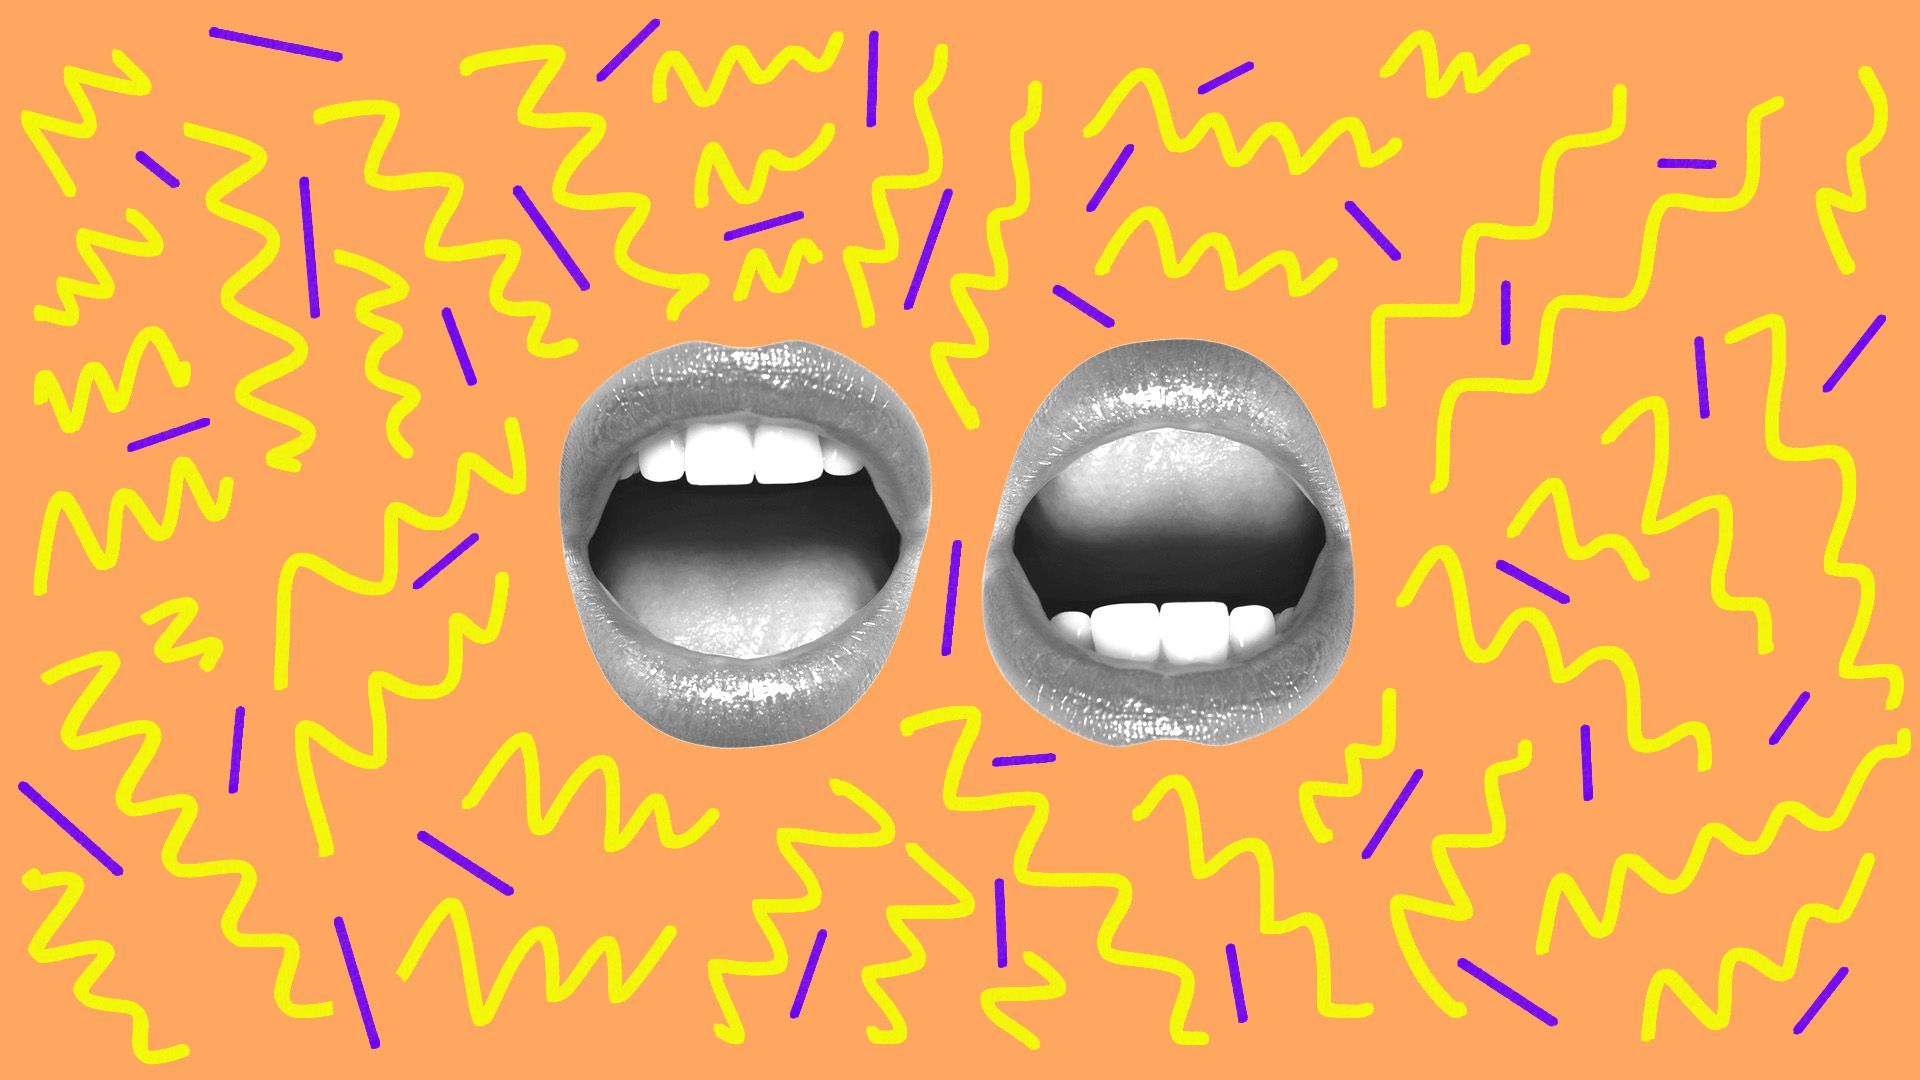 Illustration of two mouths surrounded by 90s style pattern